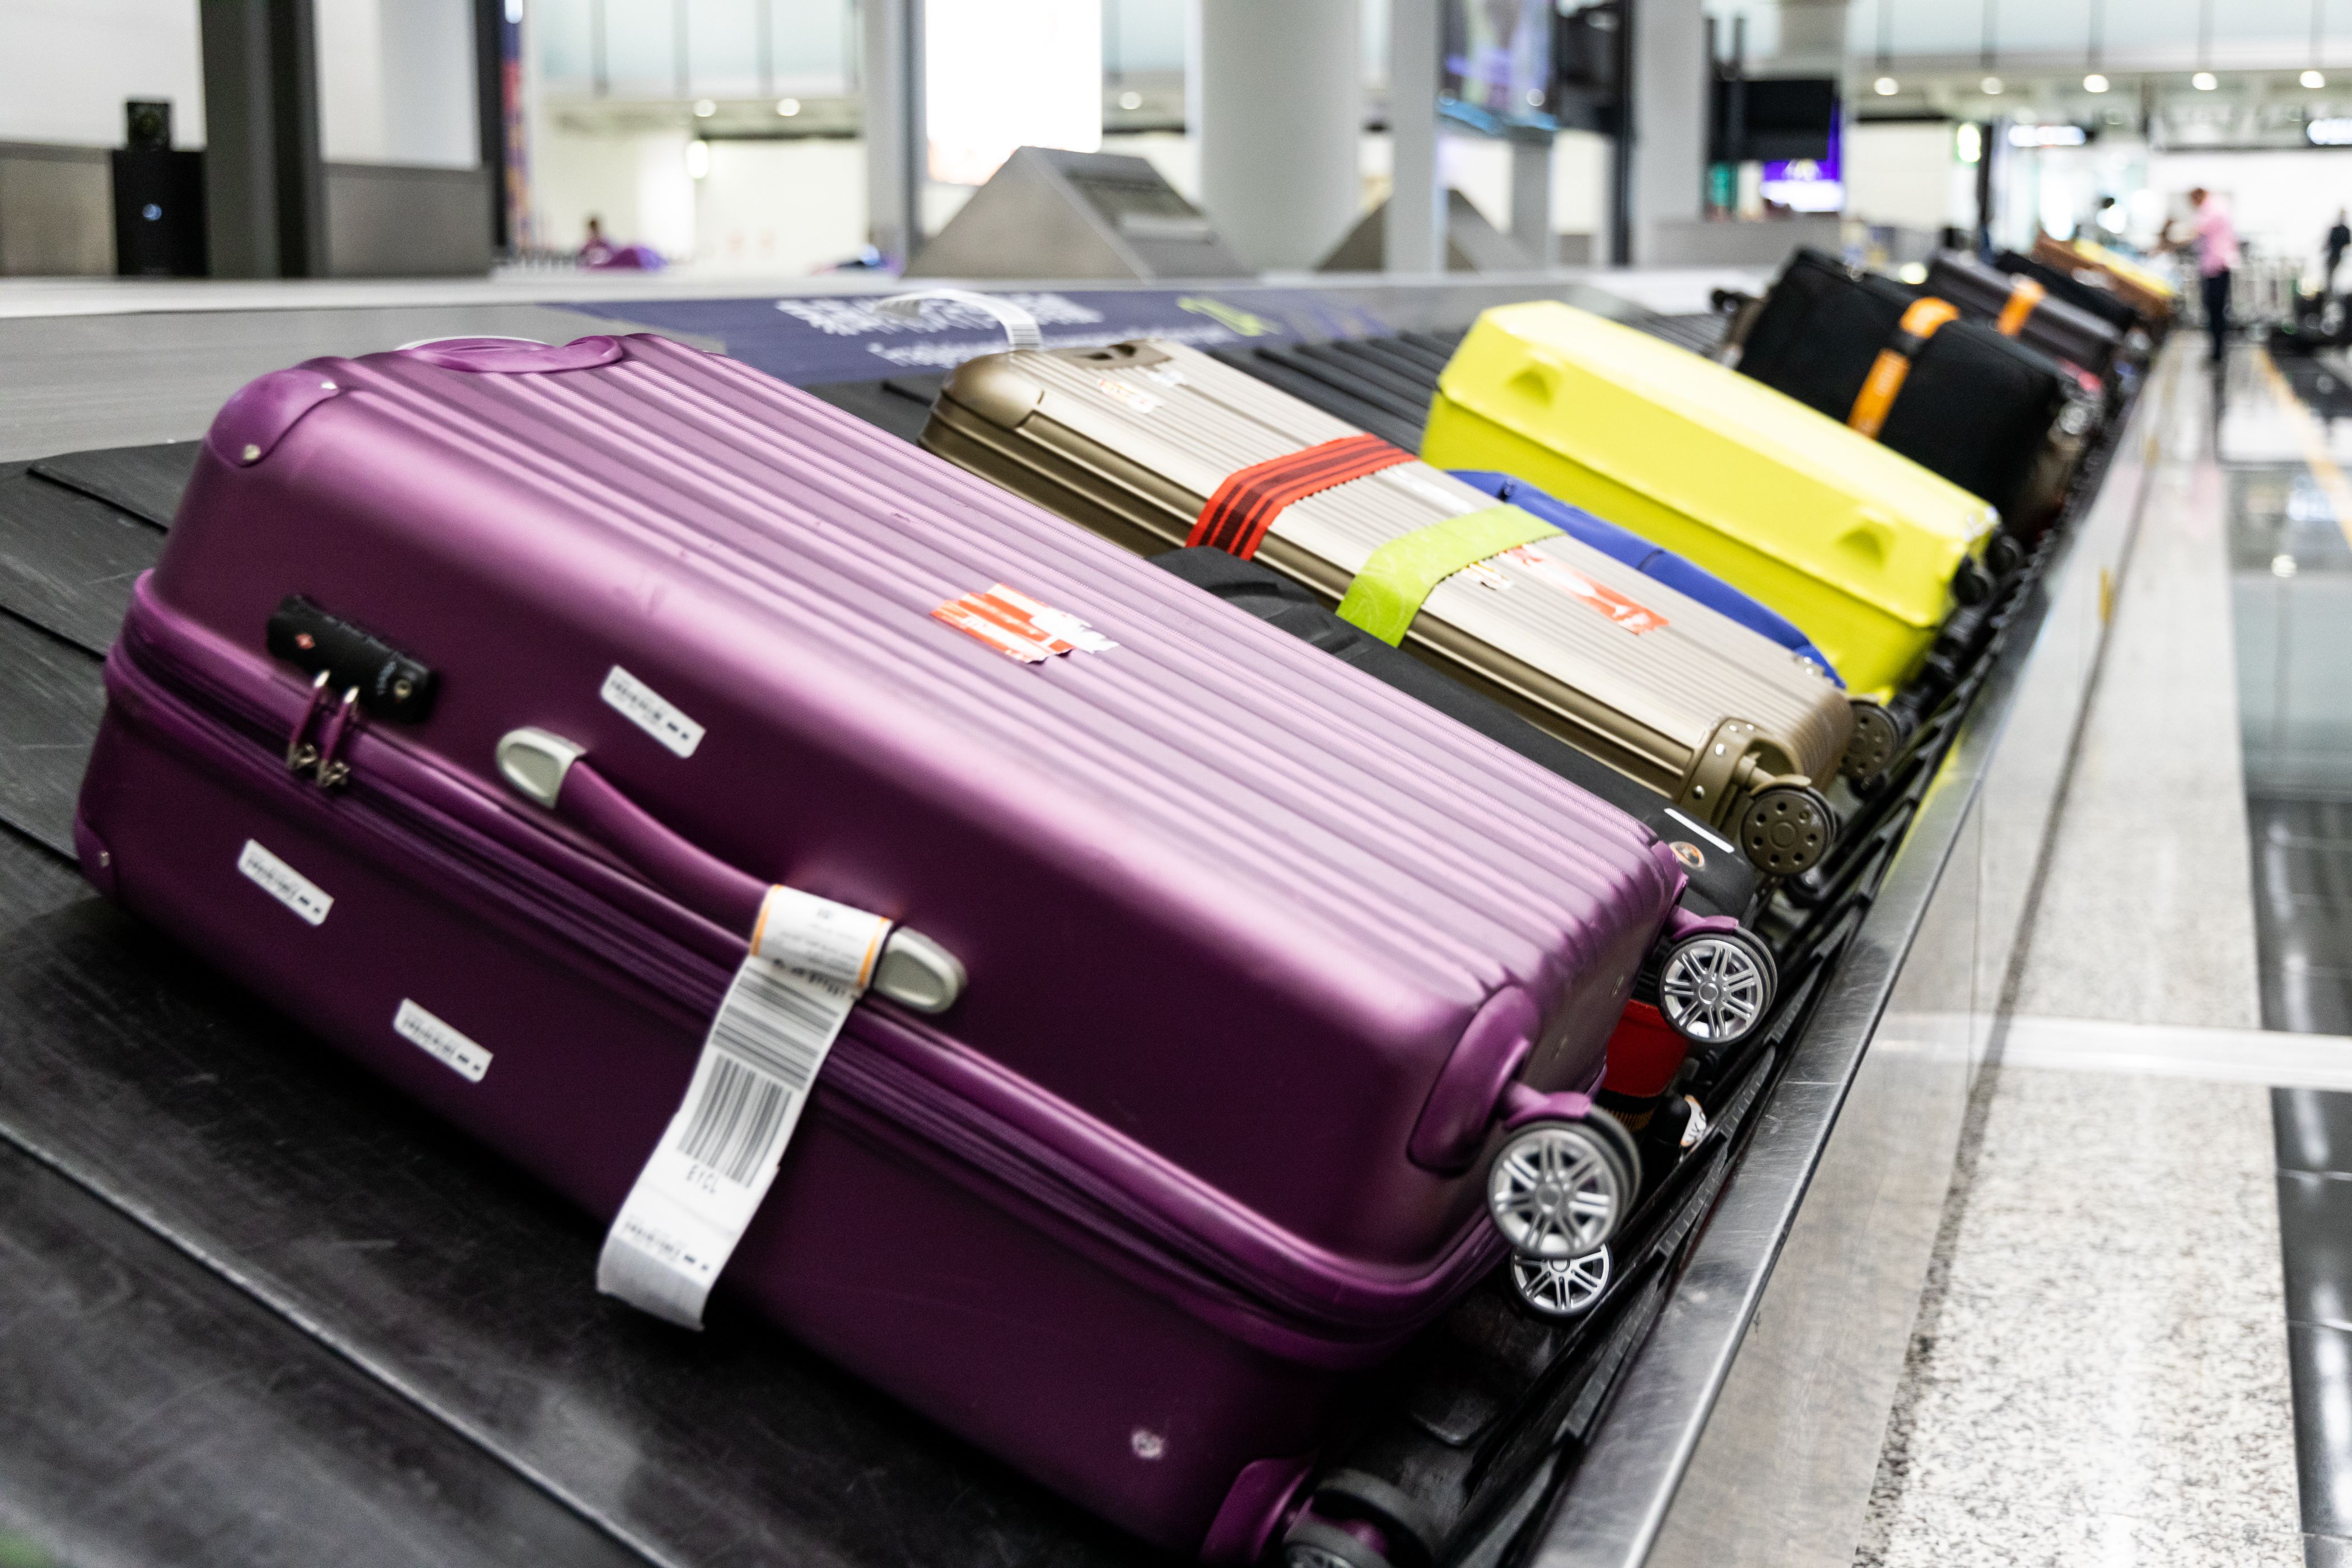 All information about baggage